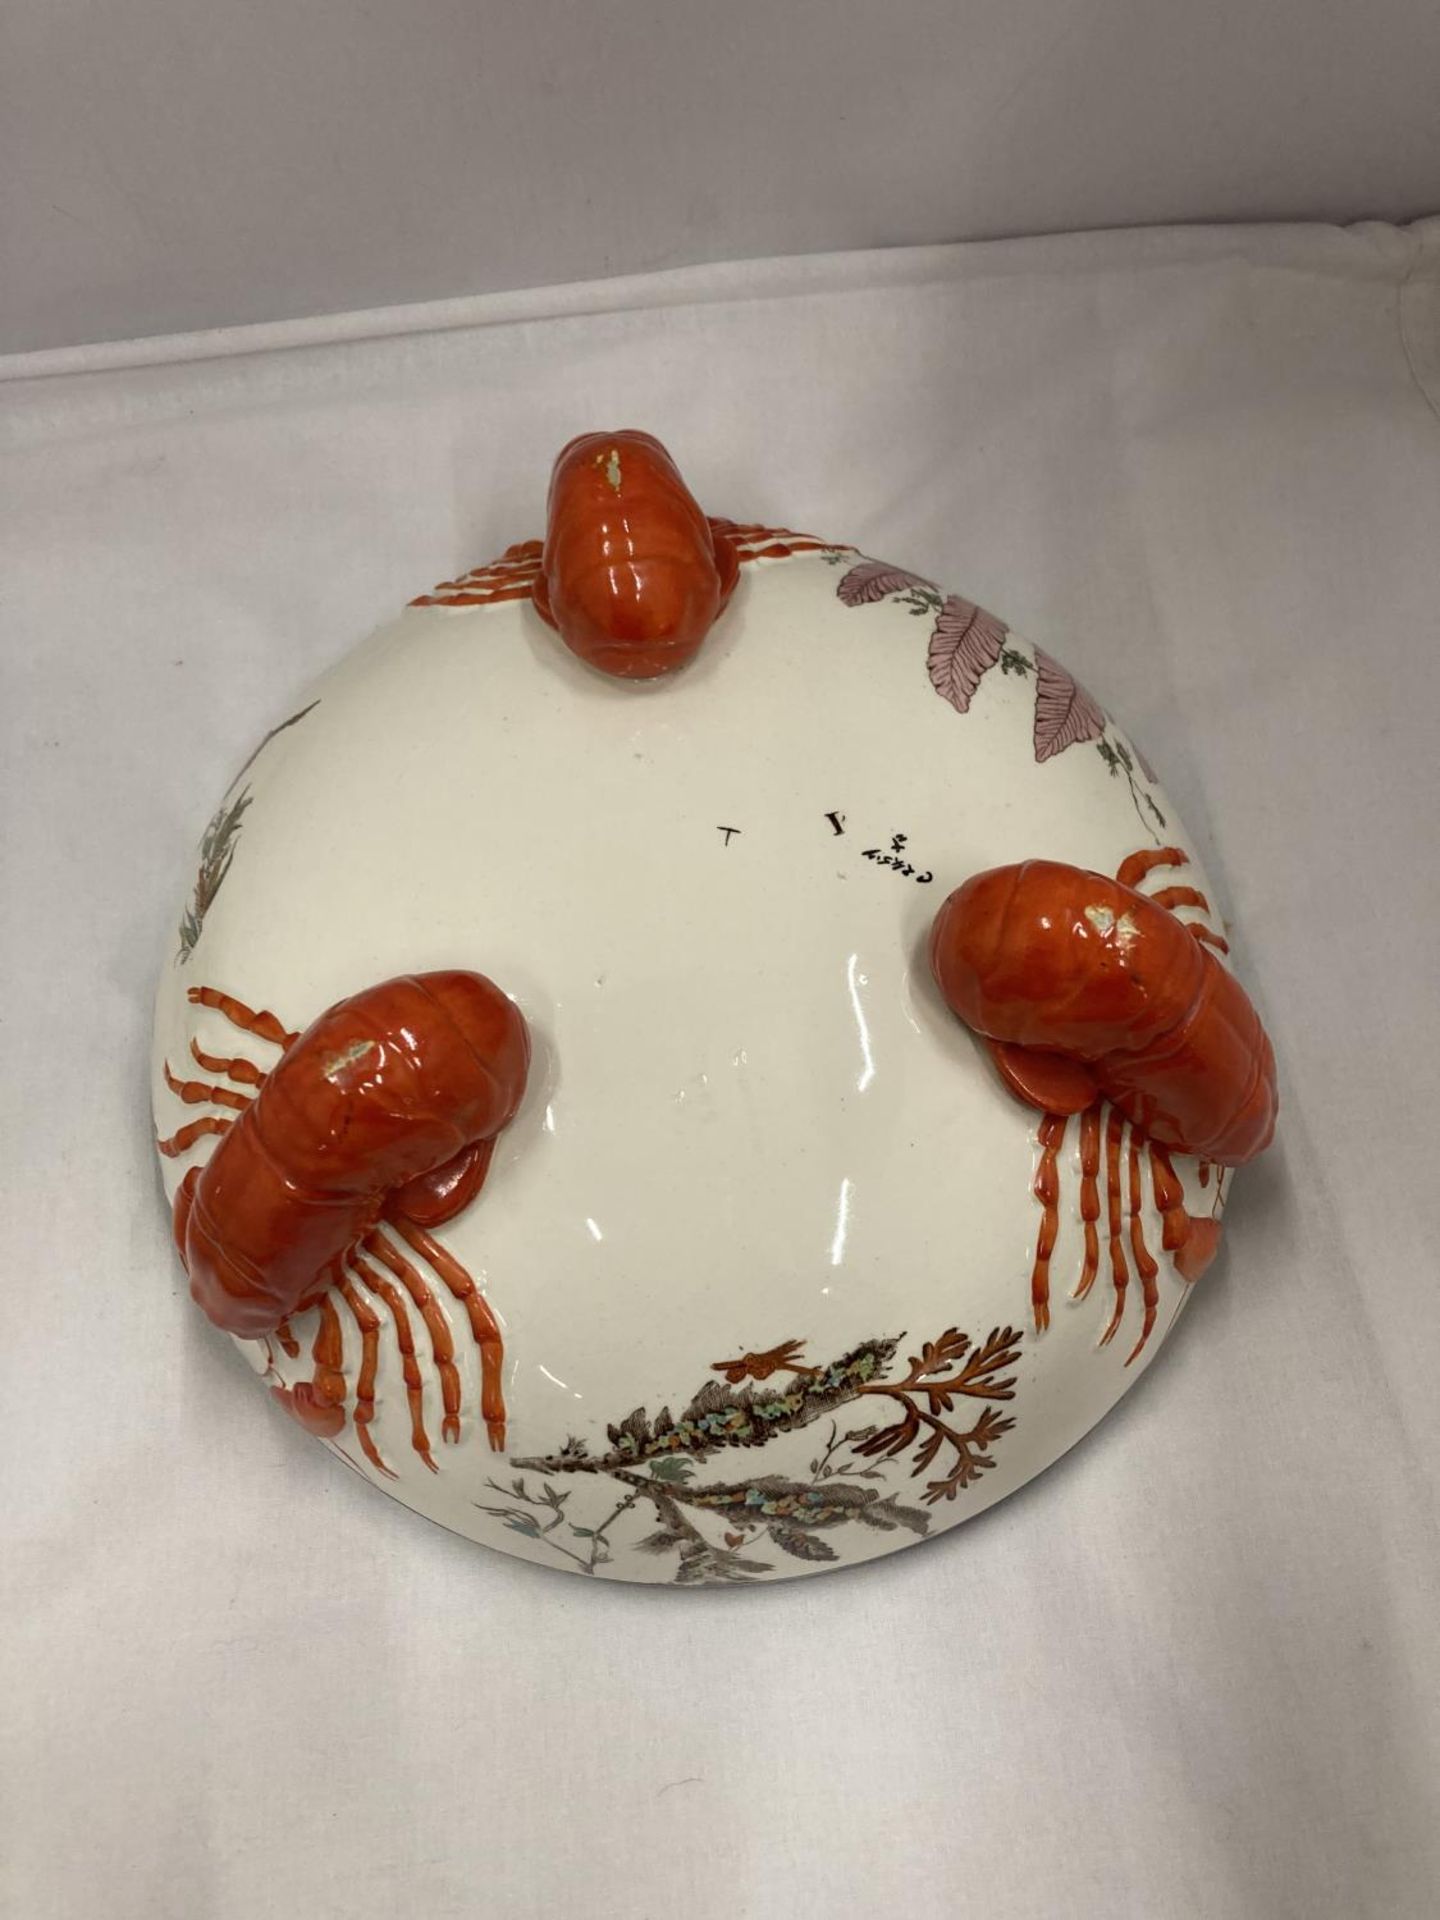 A VICTORIAN WEDGWOOD MAJOLICA SALAD BOWL WITH LOBSTER FEET AND MATCHING SILVER PLATED SERVERS - Image 4 of 7